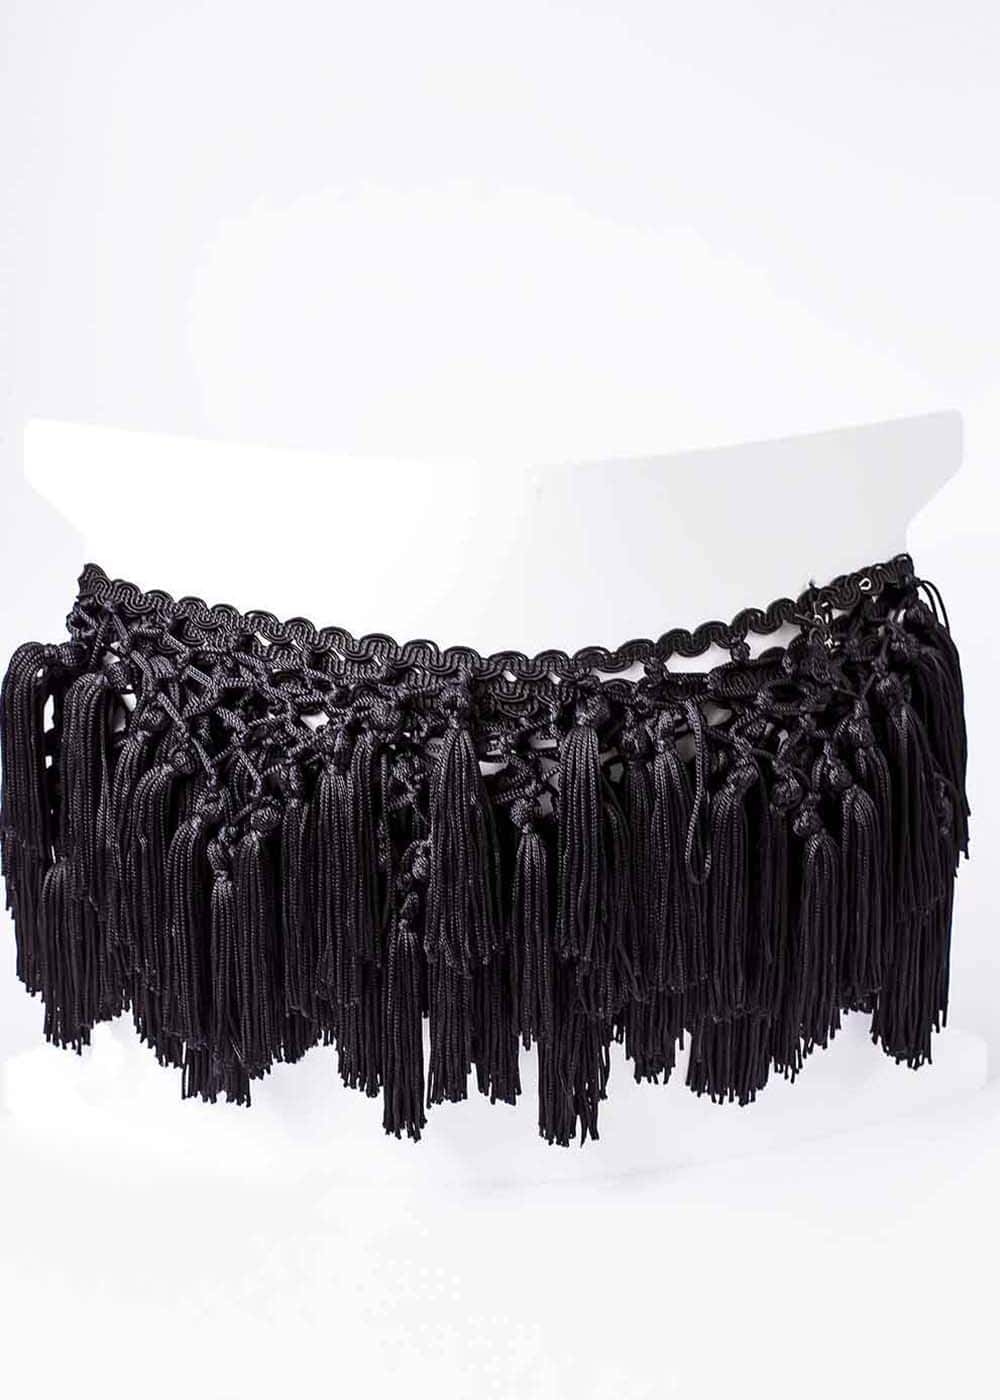 Knotted dance fringe triangle to buy at the Grand Prix store